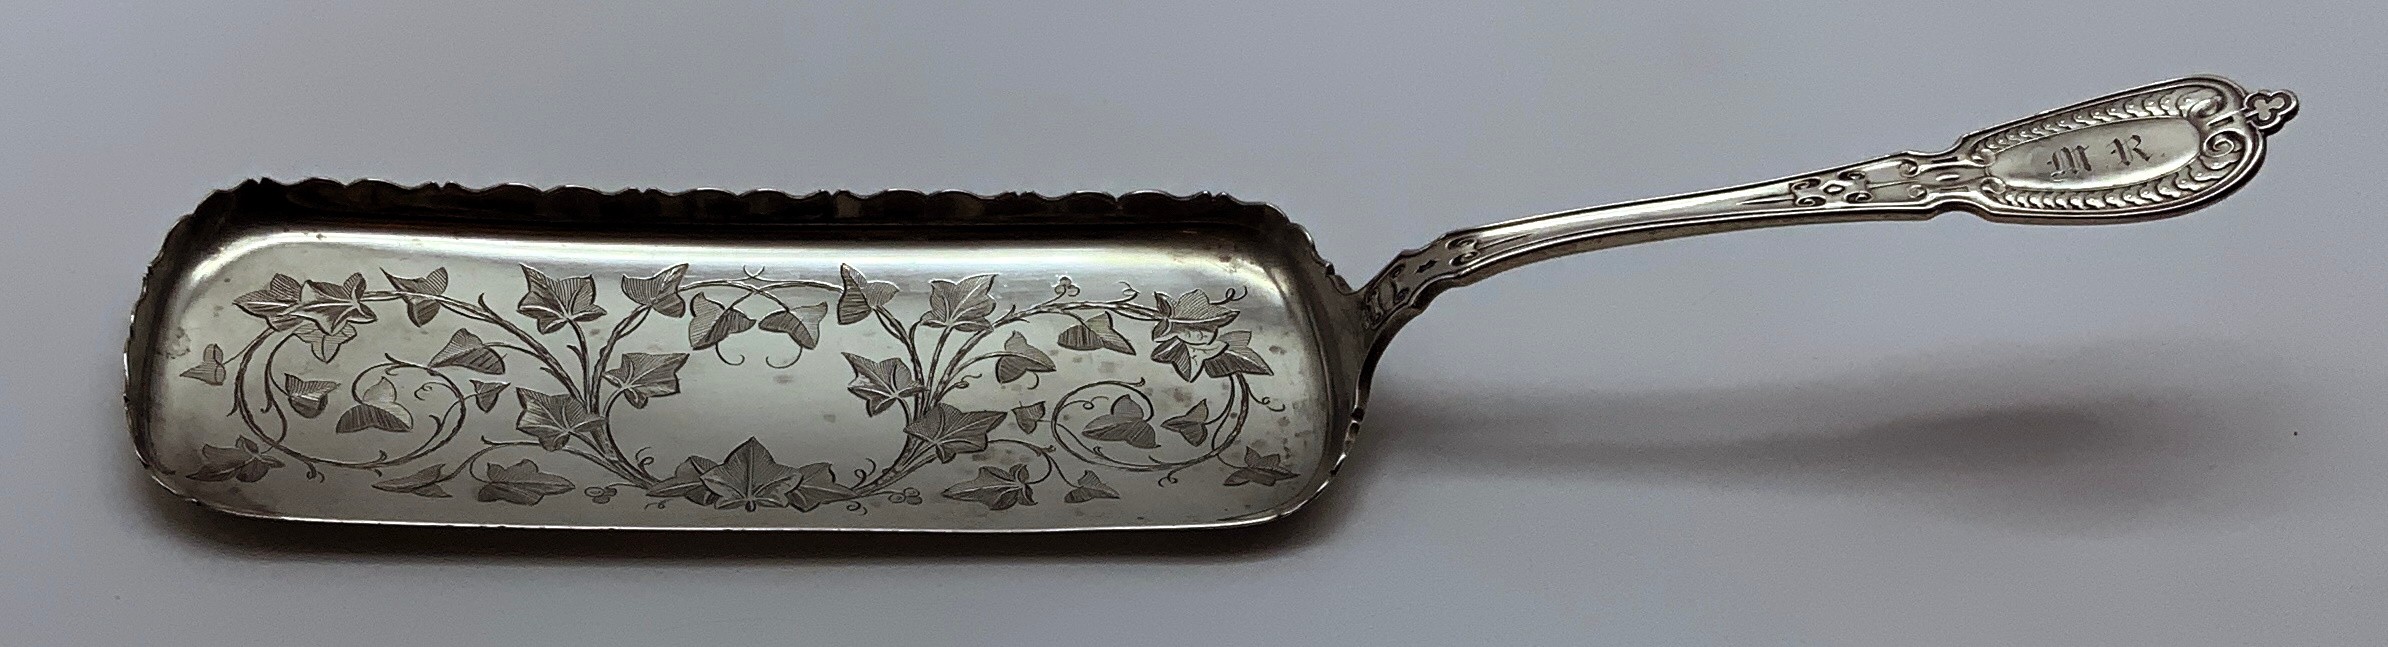 19TH C TIFFANY & CO SOLID STERLING SILVER CRUMBER JOHN POLHAMUS PATENT